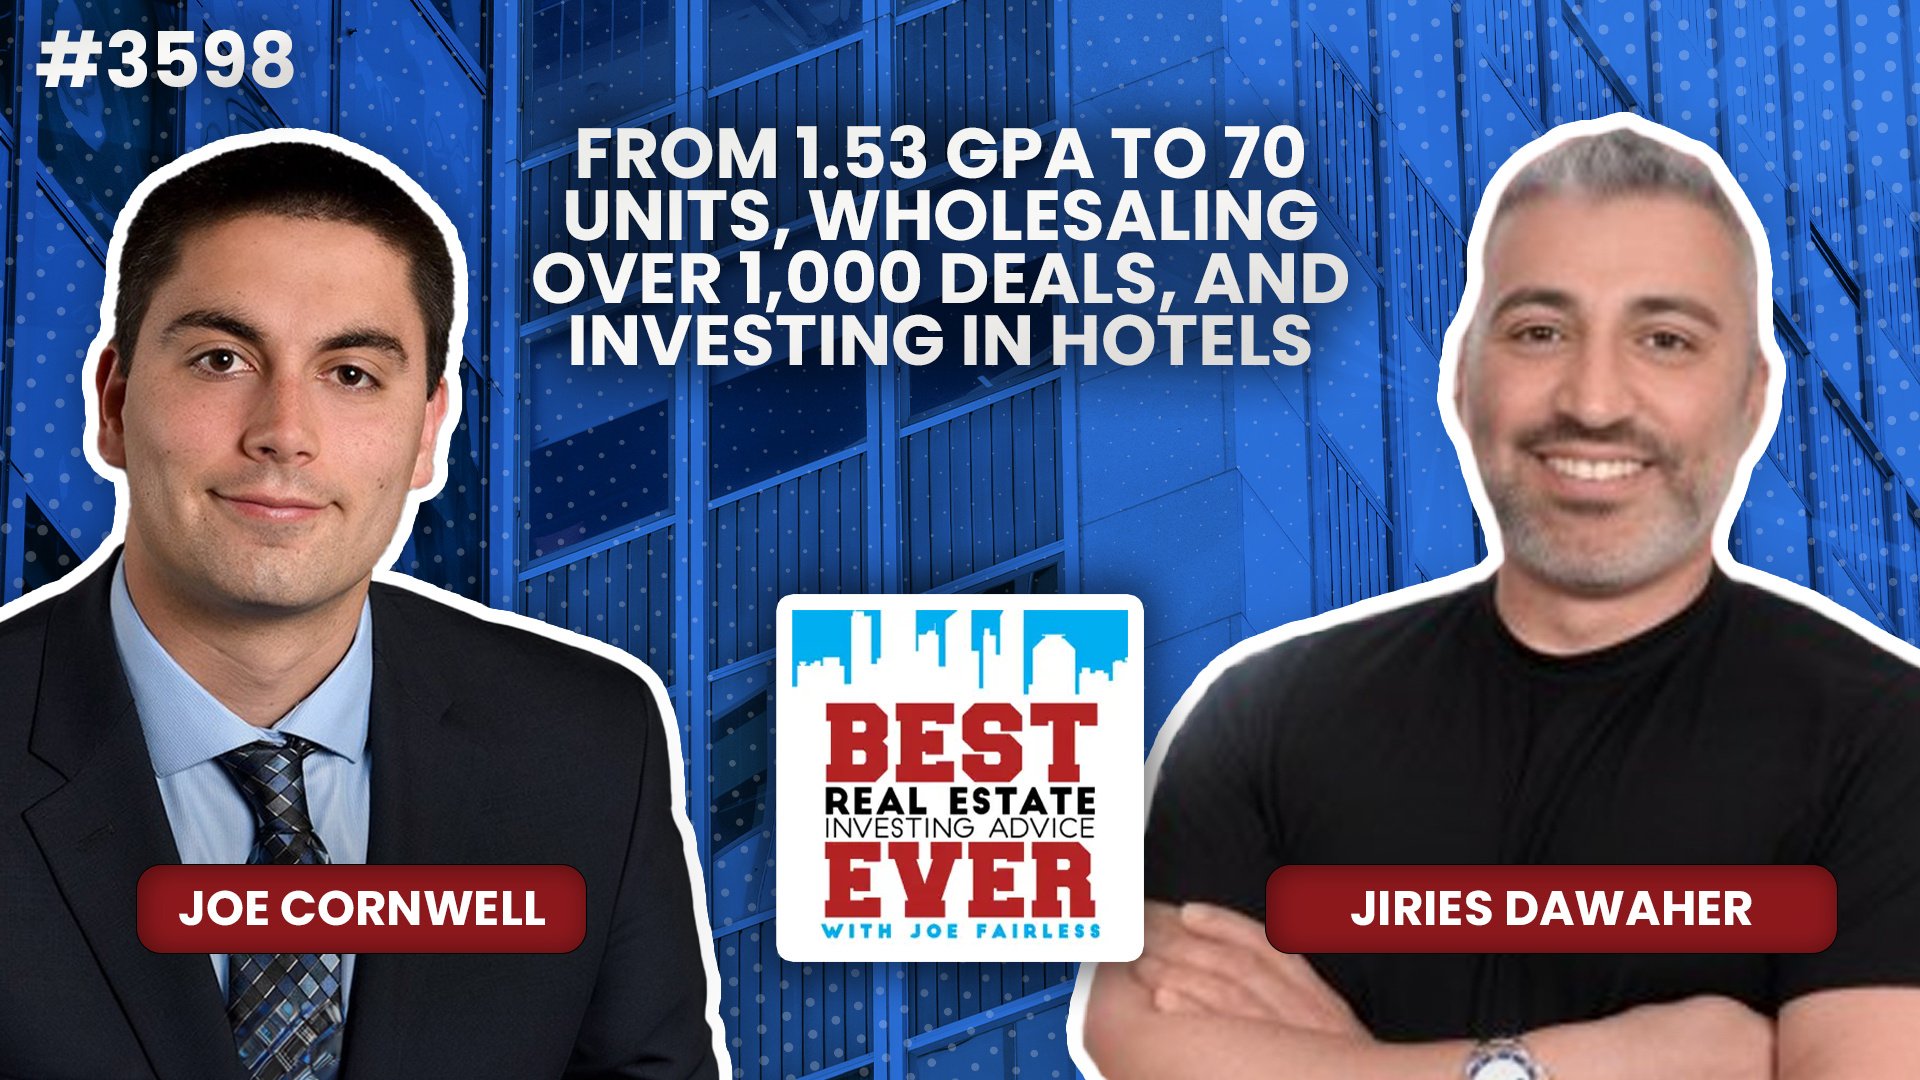 JF3598: From 1.53 GPA to 70 Units, Wholesaling Over 1,000 Deals, and Investing in Hotels ft. Jiries Dawaher